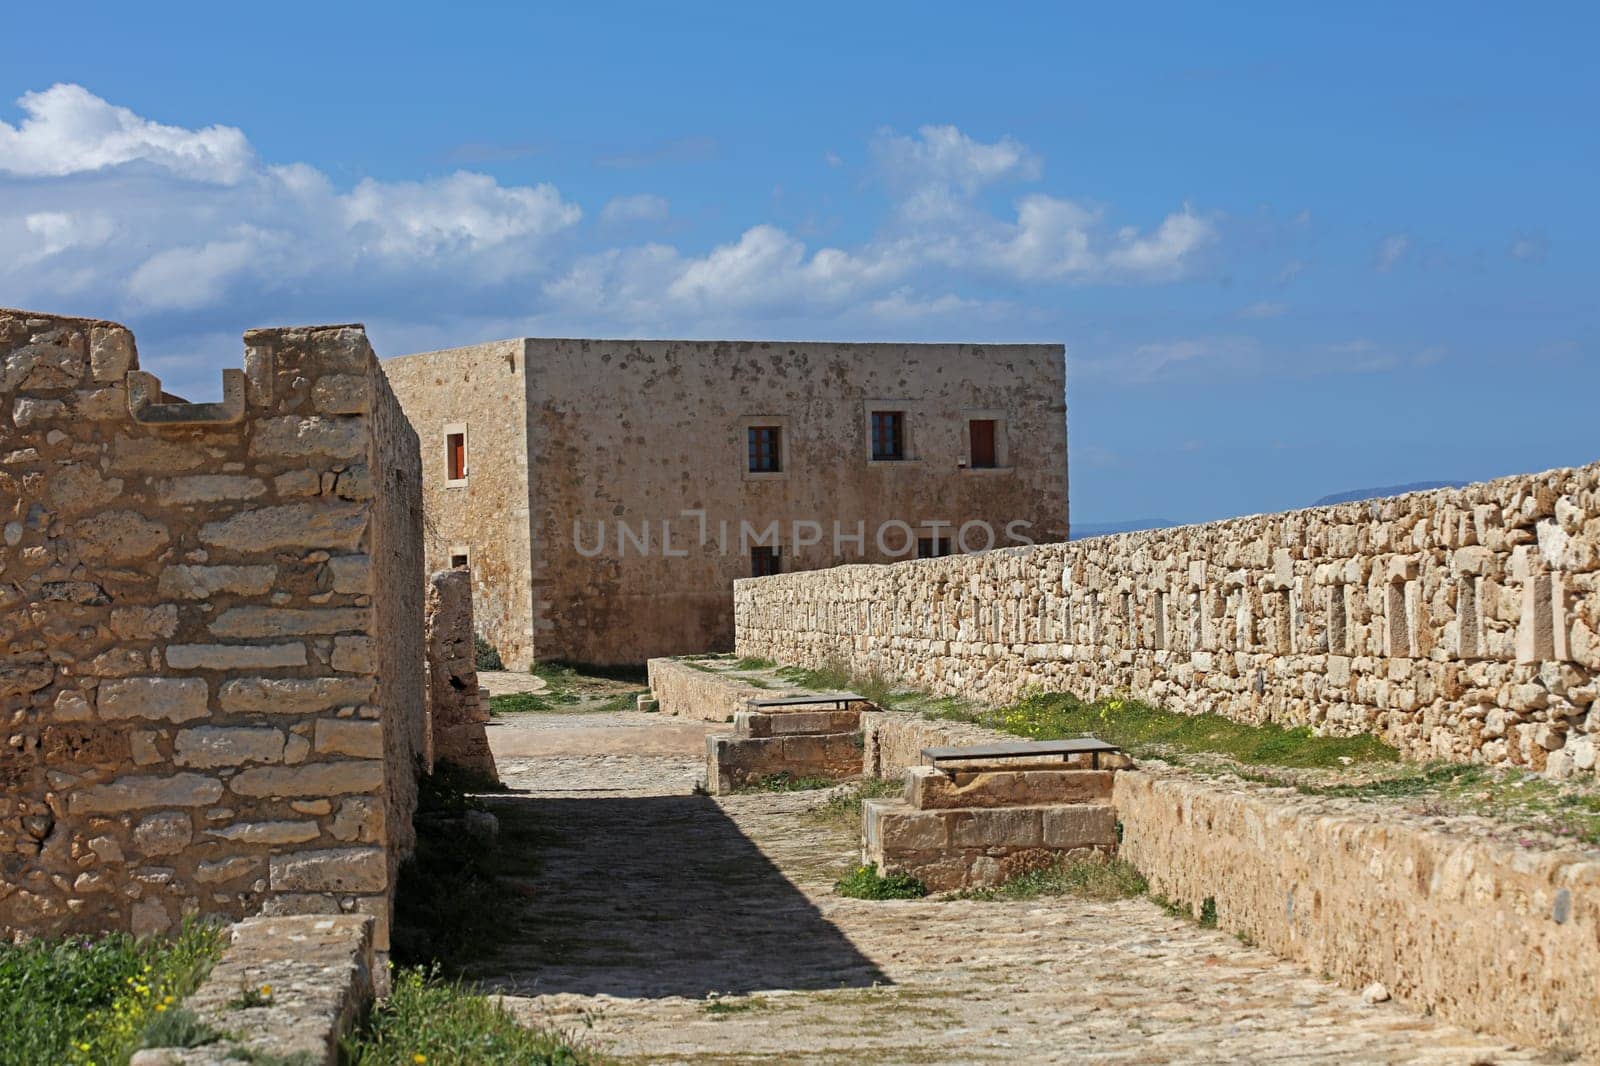 Fortezza fortress castle in Crete island Rethimno holidays exploring the old ancient stone city monuments close up summer background carnival season high quality big size prints by BakalaeroZz